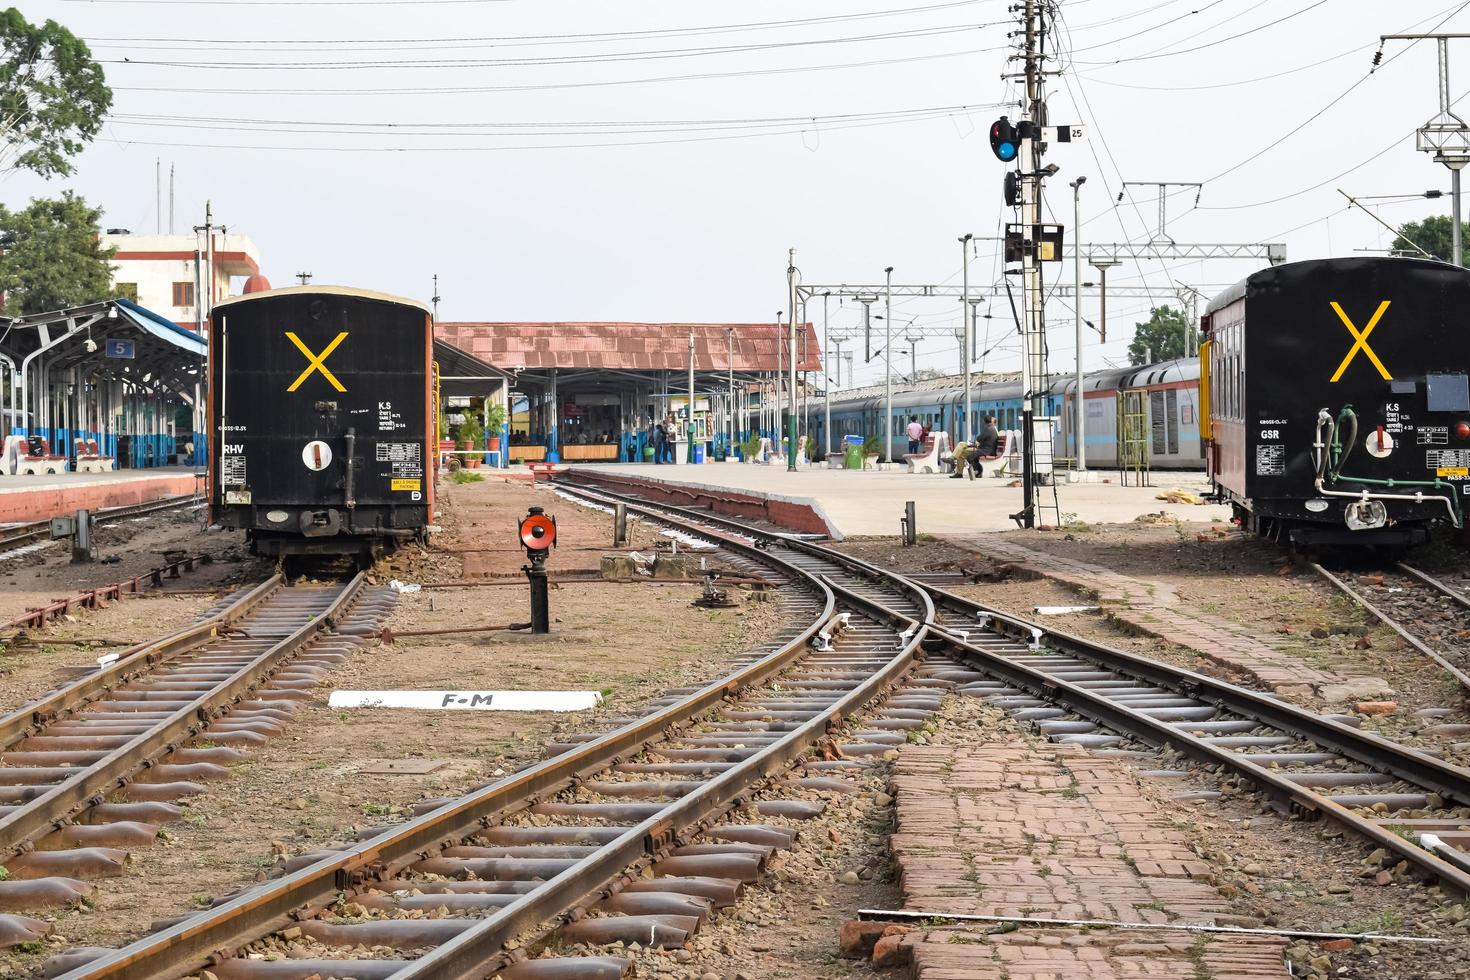 Kalka, Haryana, India May 14 2022 - View of Toy train Railway Tracks from the middle during daytime near Kalka railway station in India, Toy train track view, Indian Railway junction, Heavy industry photo